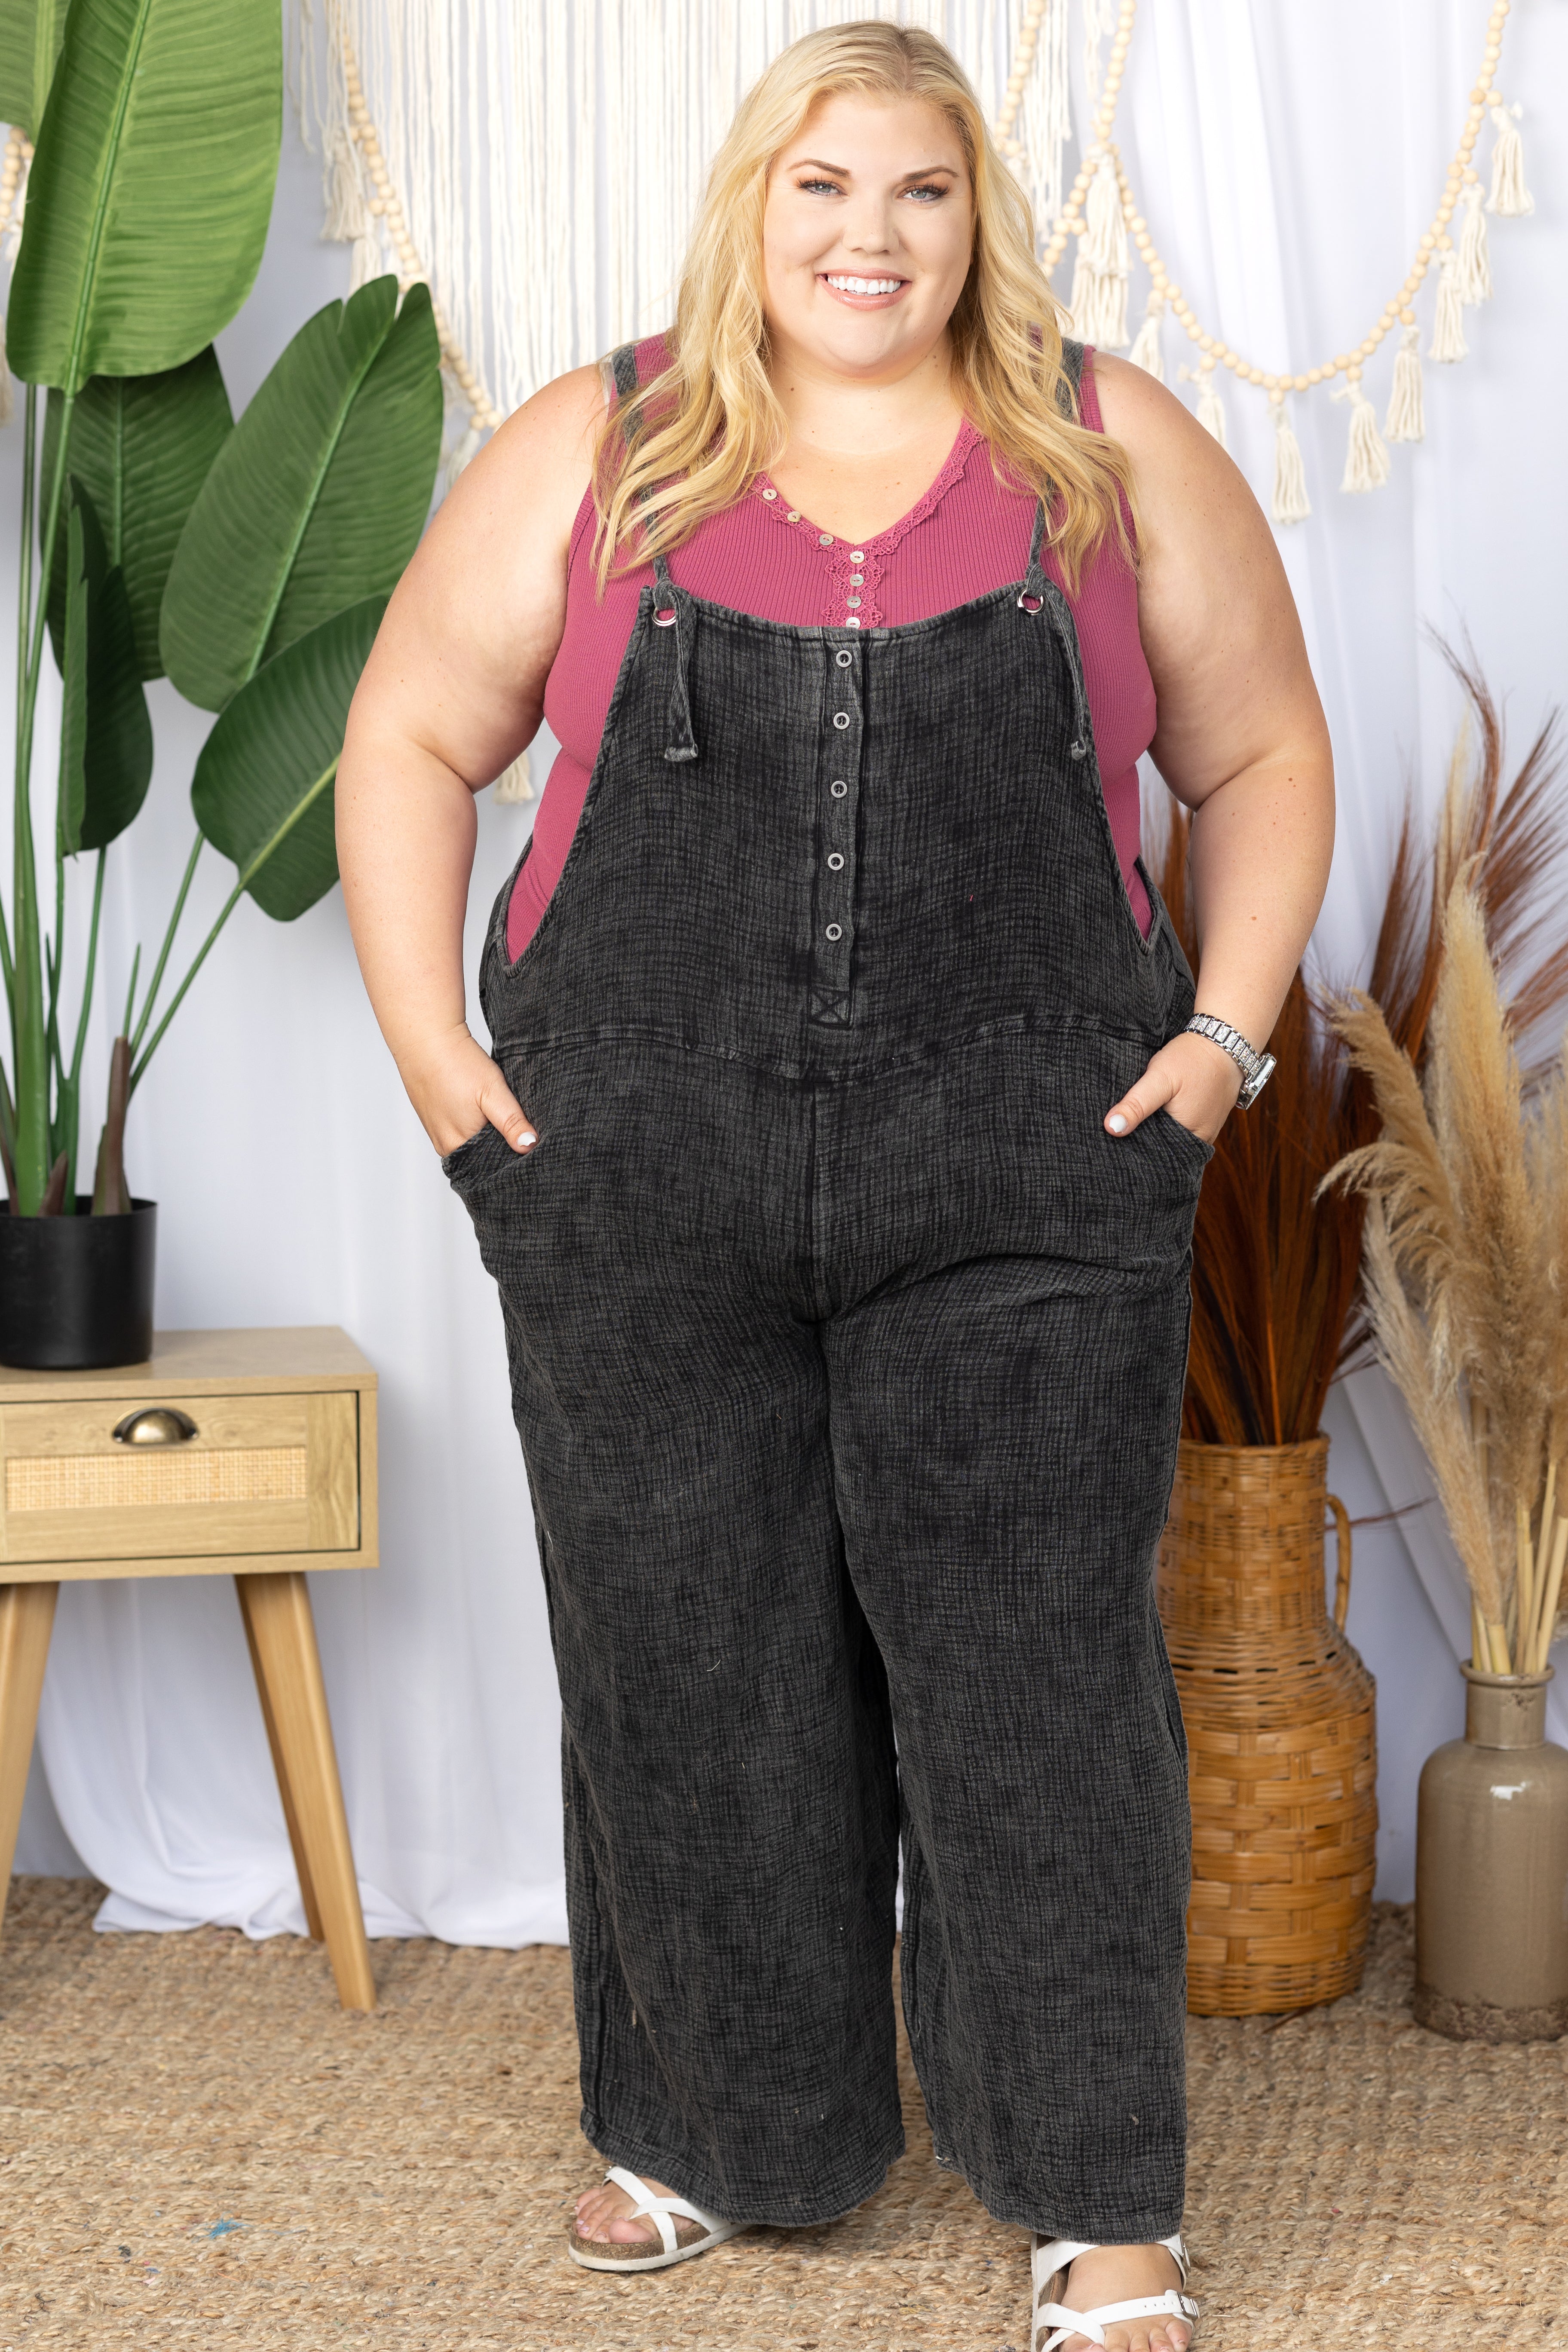 White Birch We're Jammin' Mineral Washed Overalls Boutique Simplified